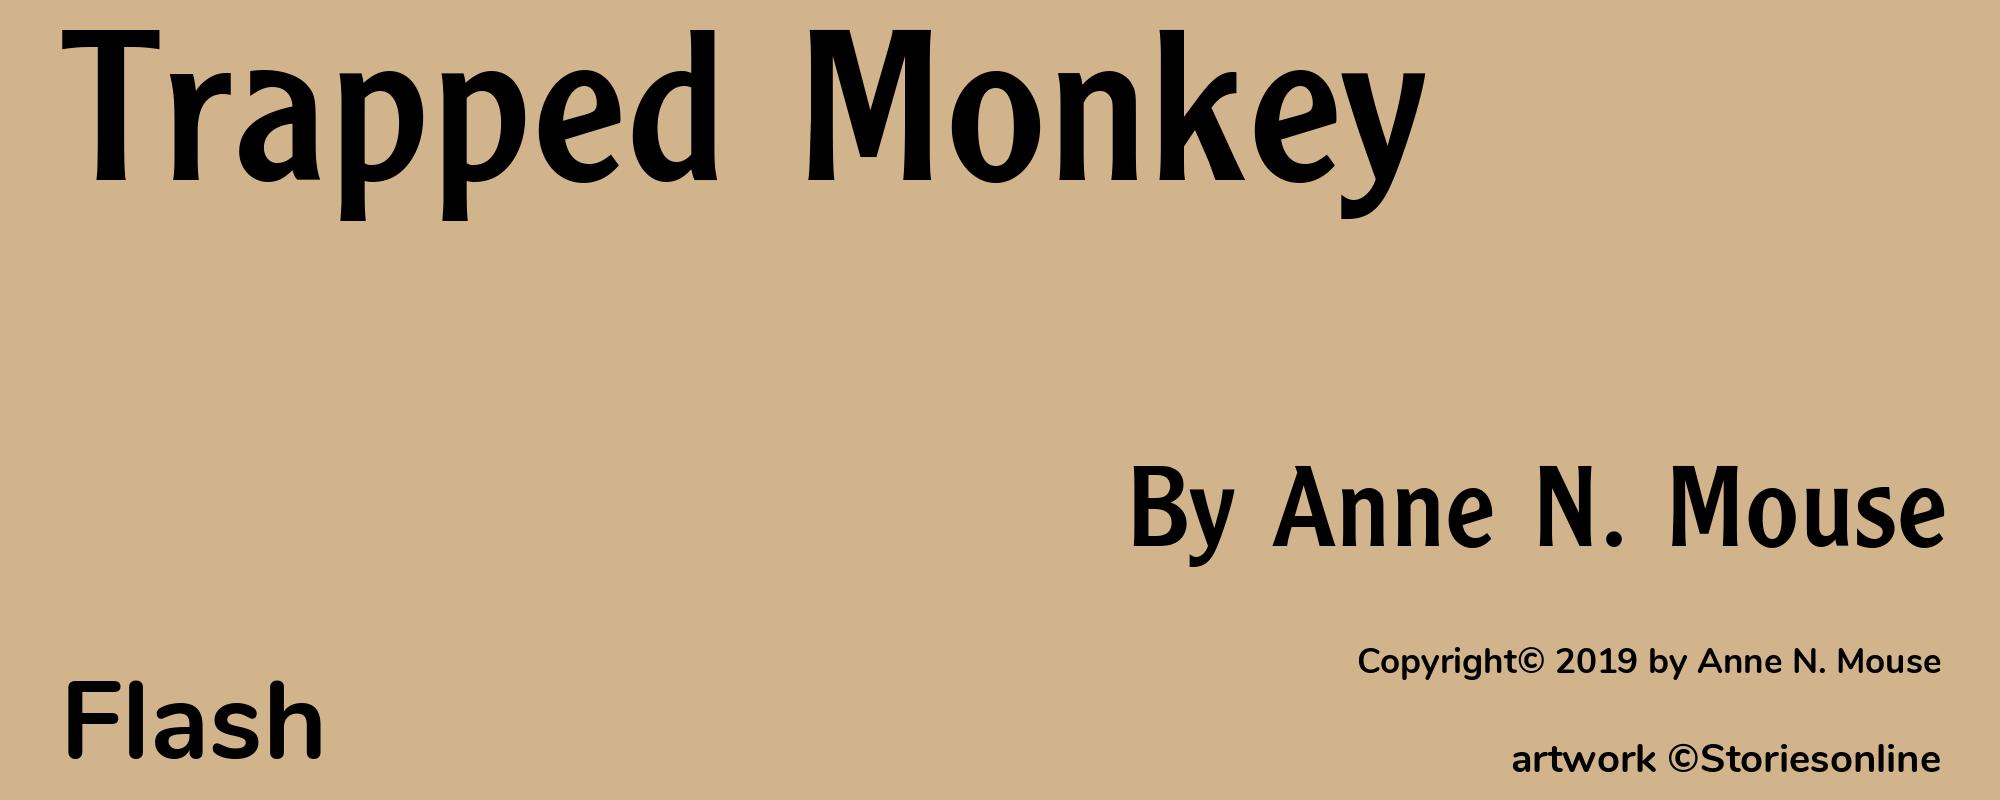 Trapped Monkey - Cover